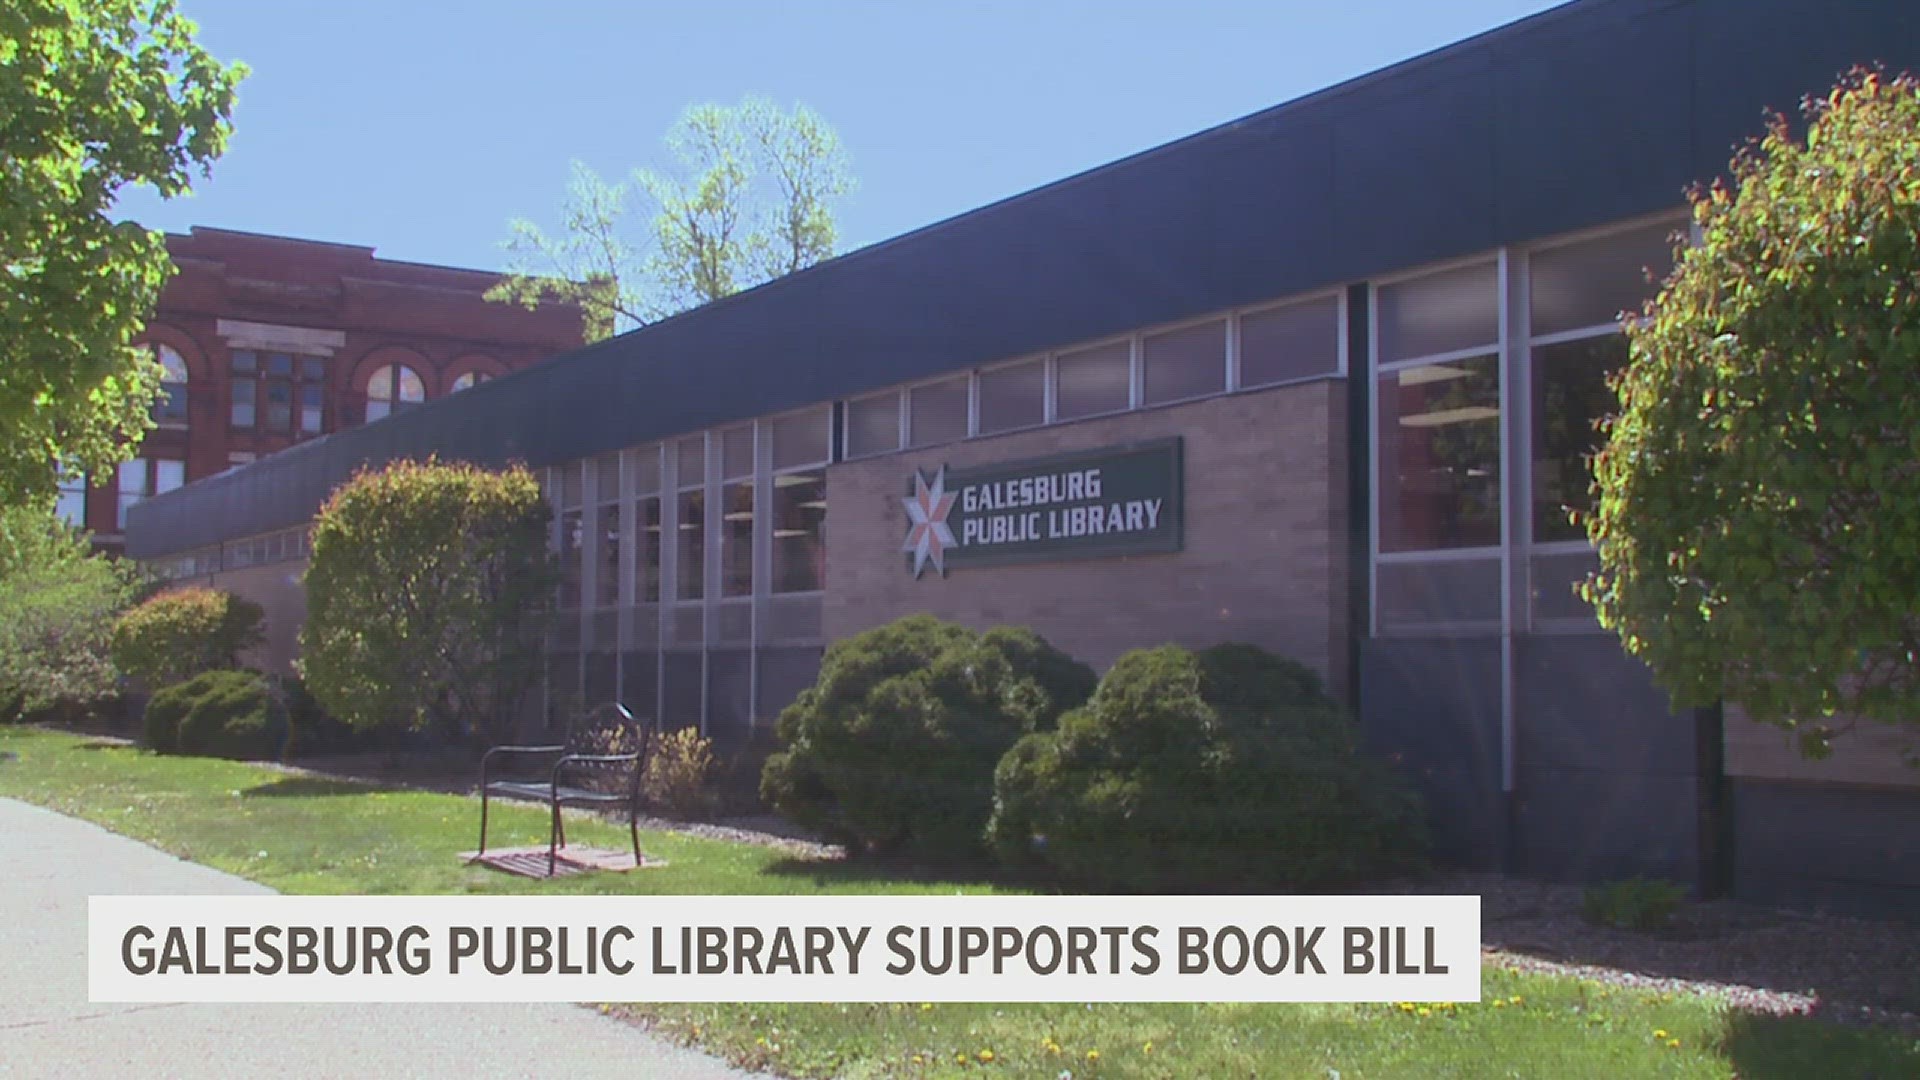 Illinois Gov. J.B. Pritzker is expected to sign the bill into law, prohibiting public libraries from banning books and resources if they want to receive state grants